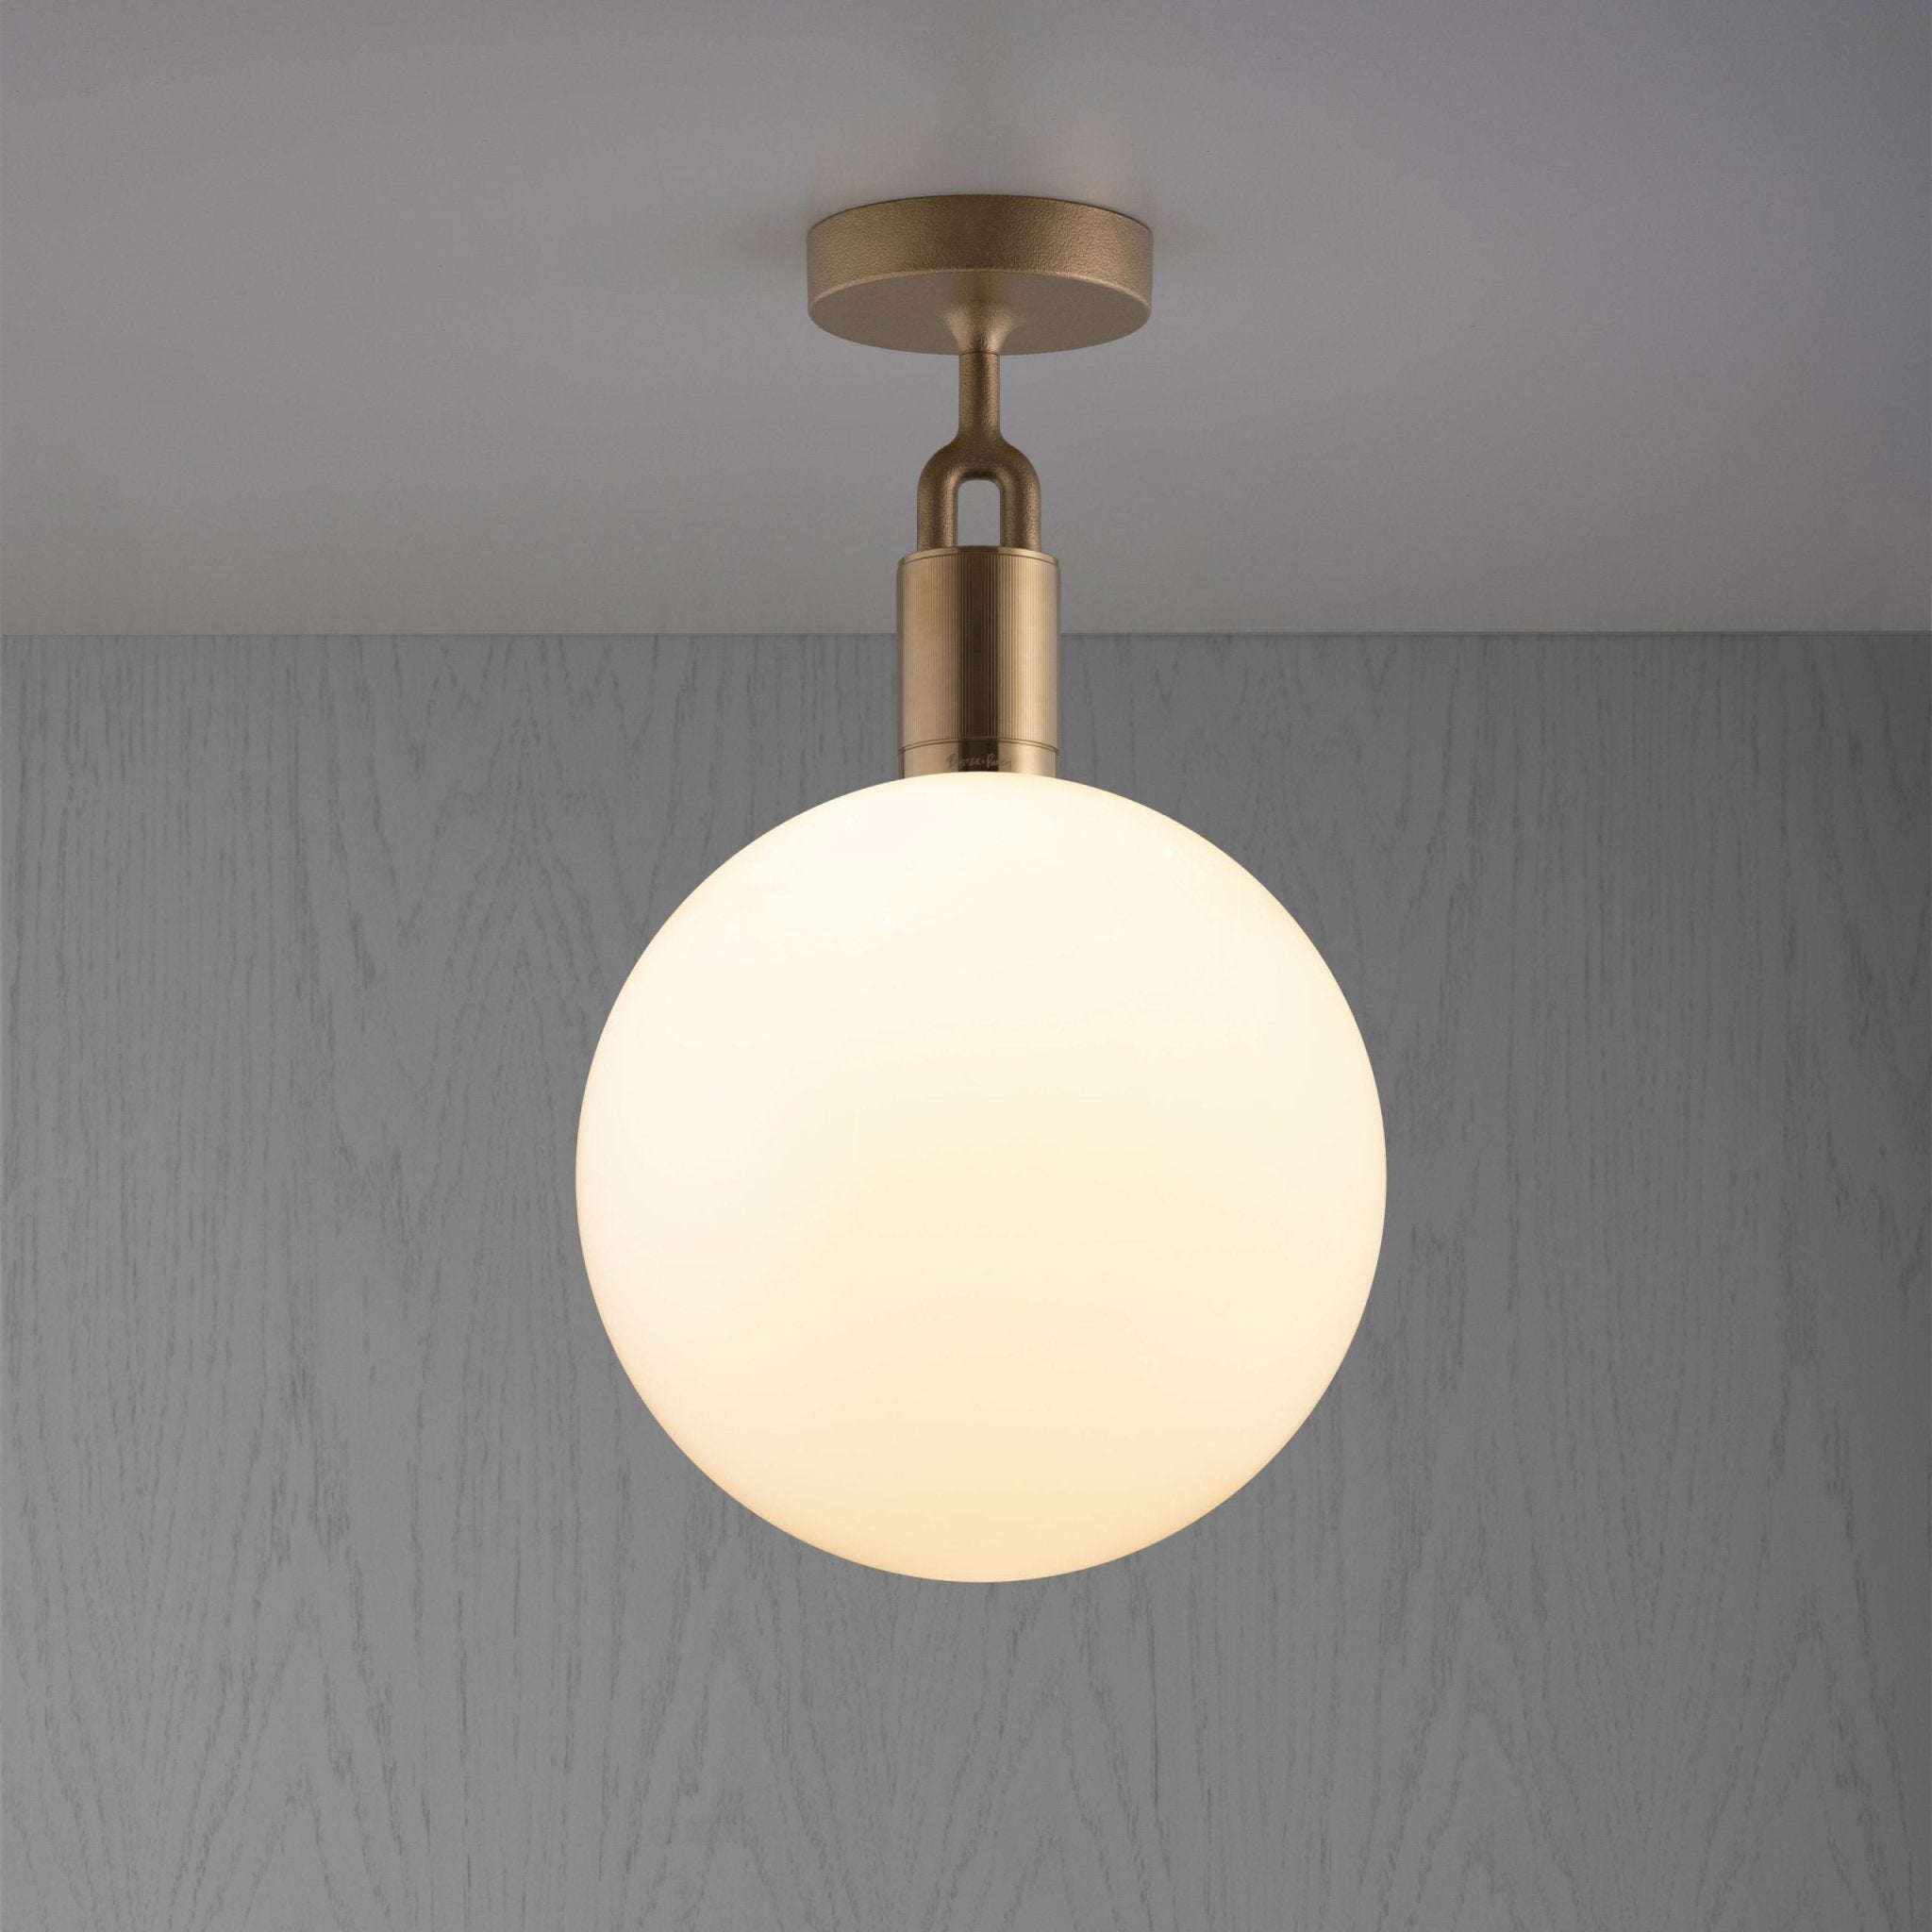 Buster and Punch - Forked Globe Groot Plafondlamp opaal